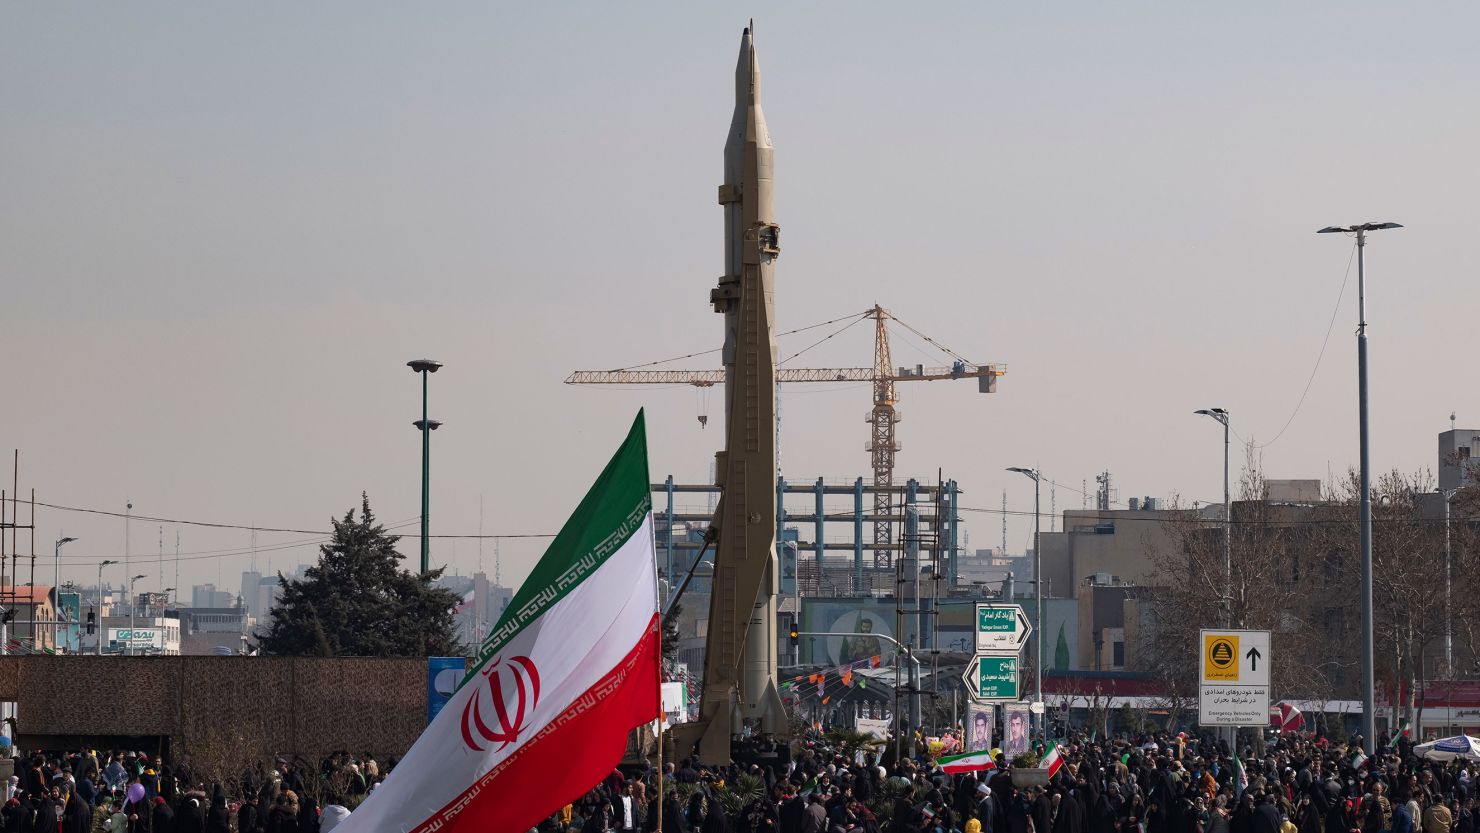 An Iranian Sejjil solid-fueled medium-range ballistic missile is being displayed at the Azadi square in western Tehran during a rally on February 11.